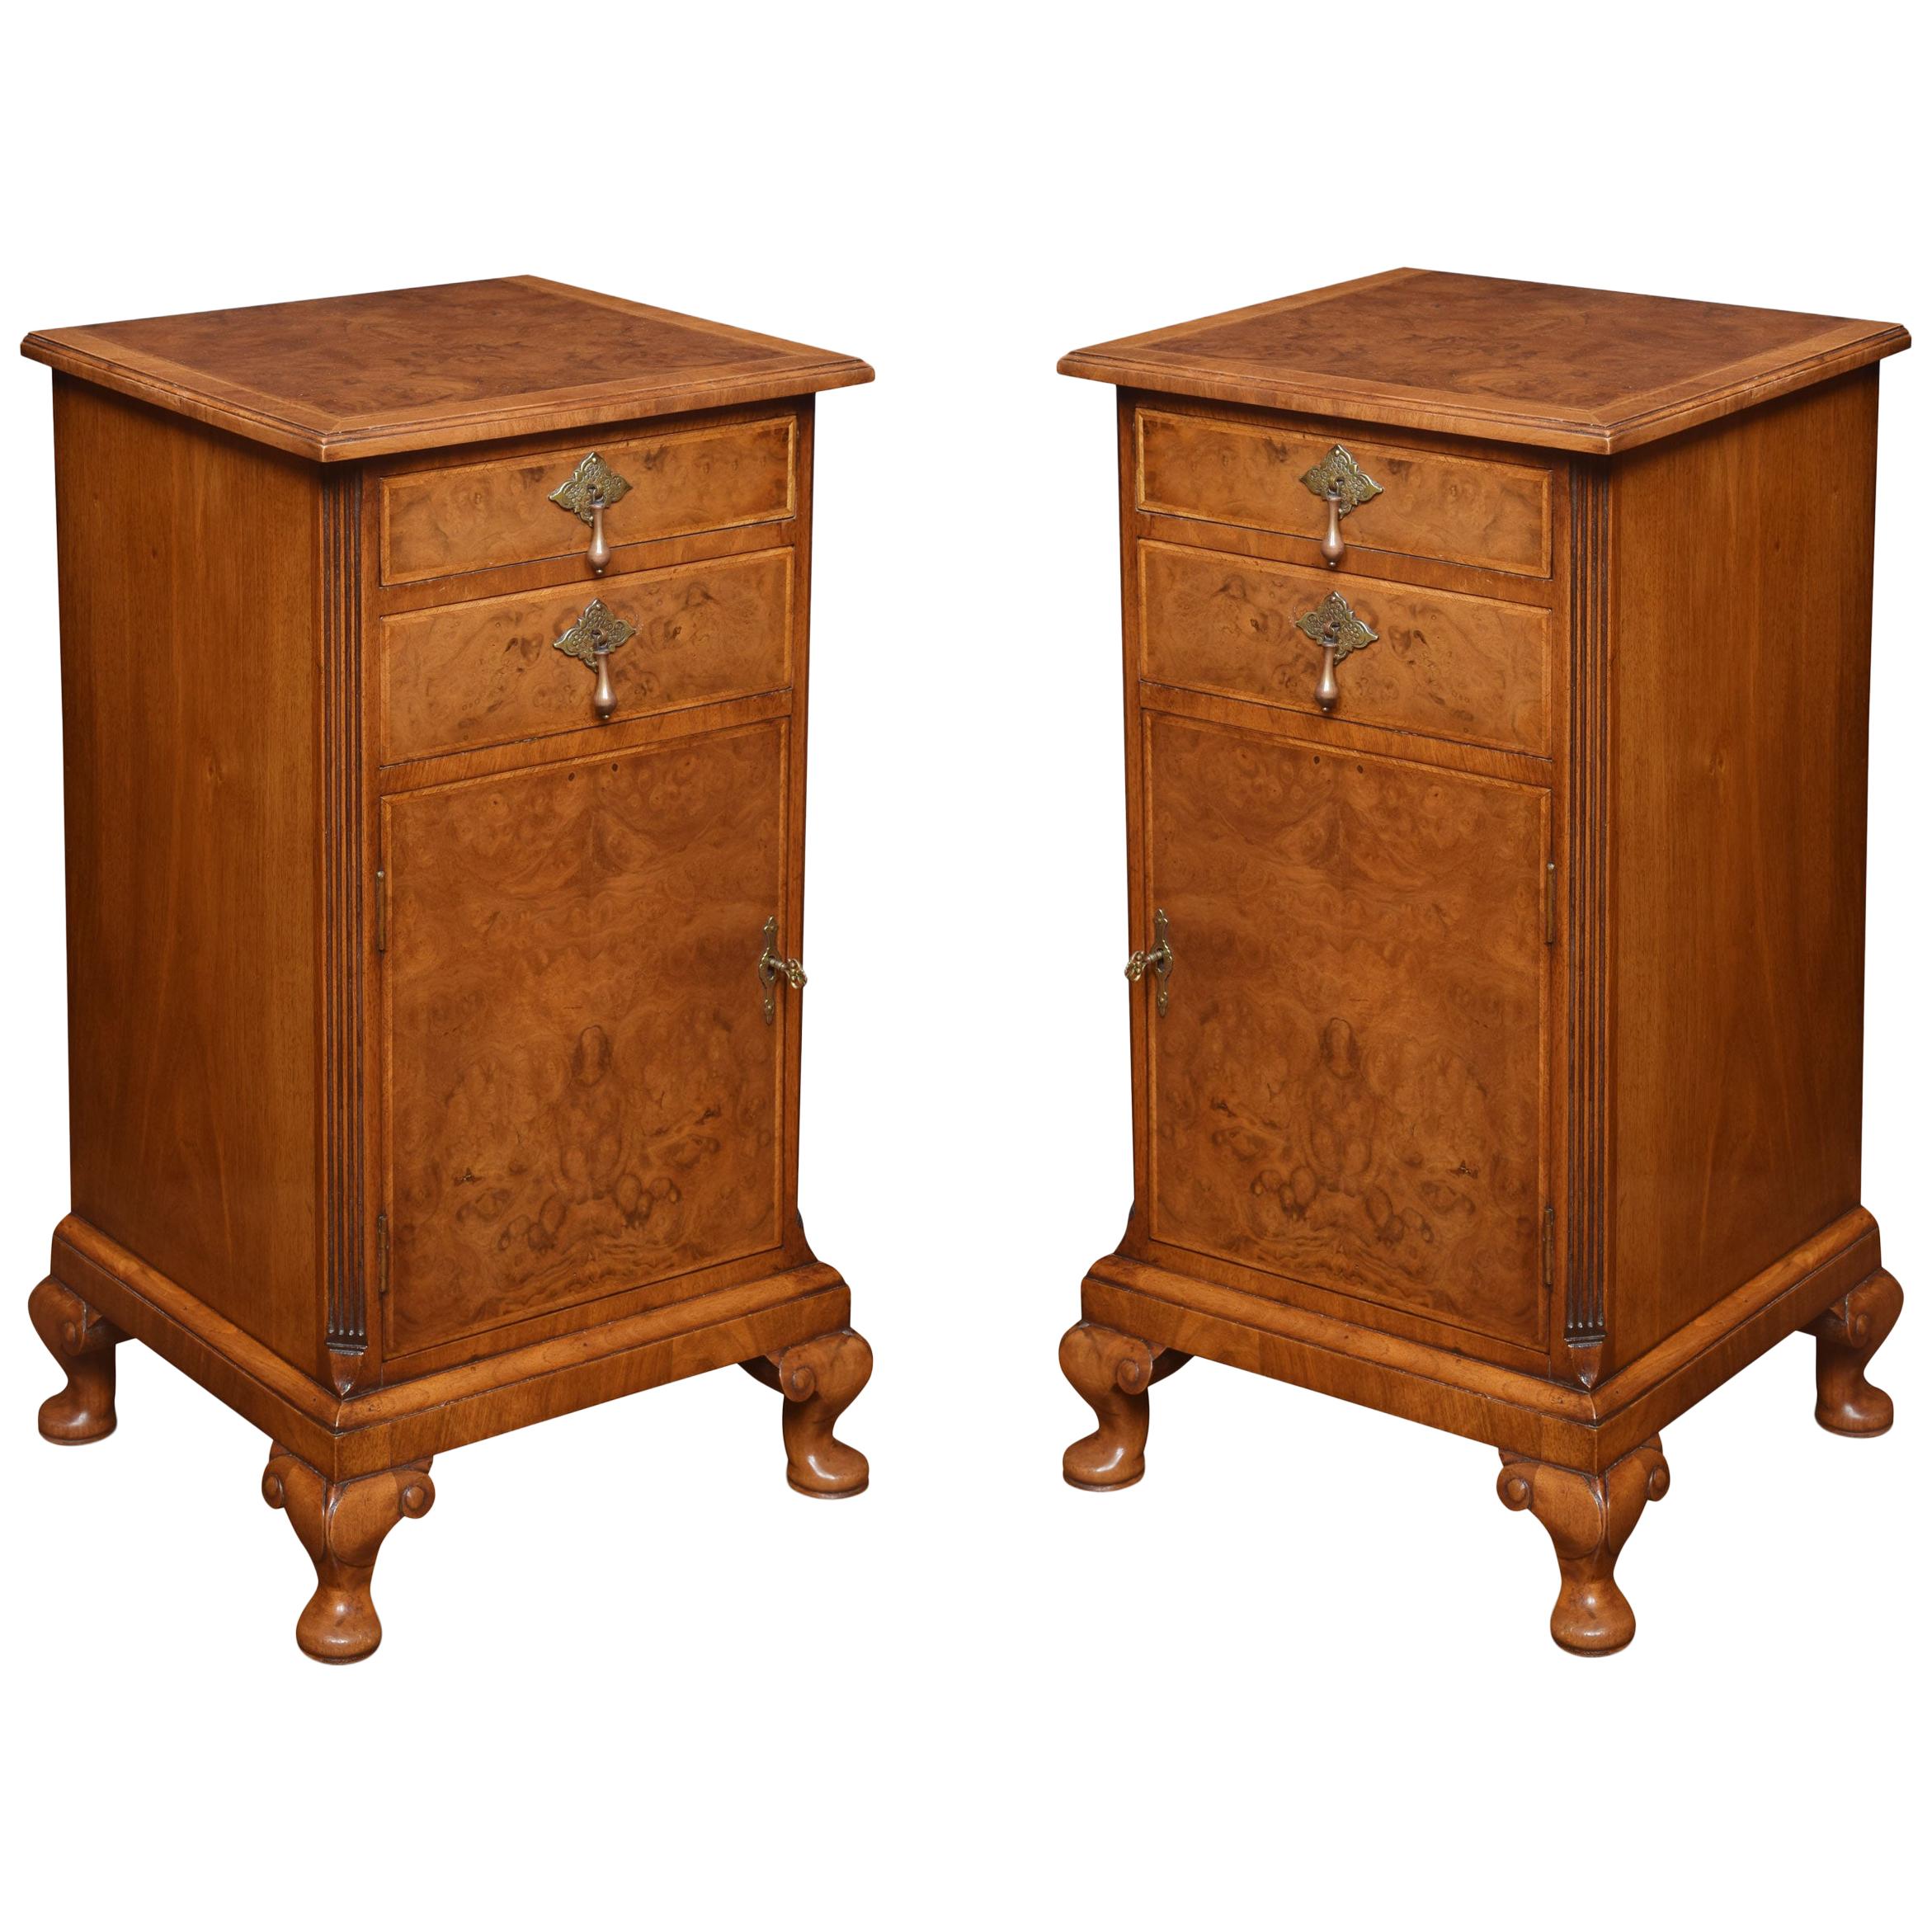 Pair of Queen Ann Style Bedside Cabinets